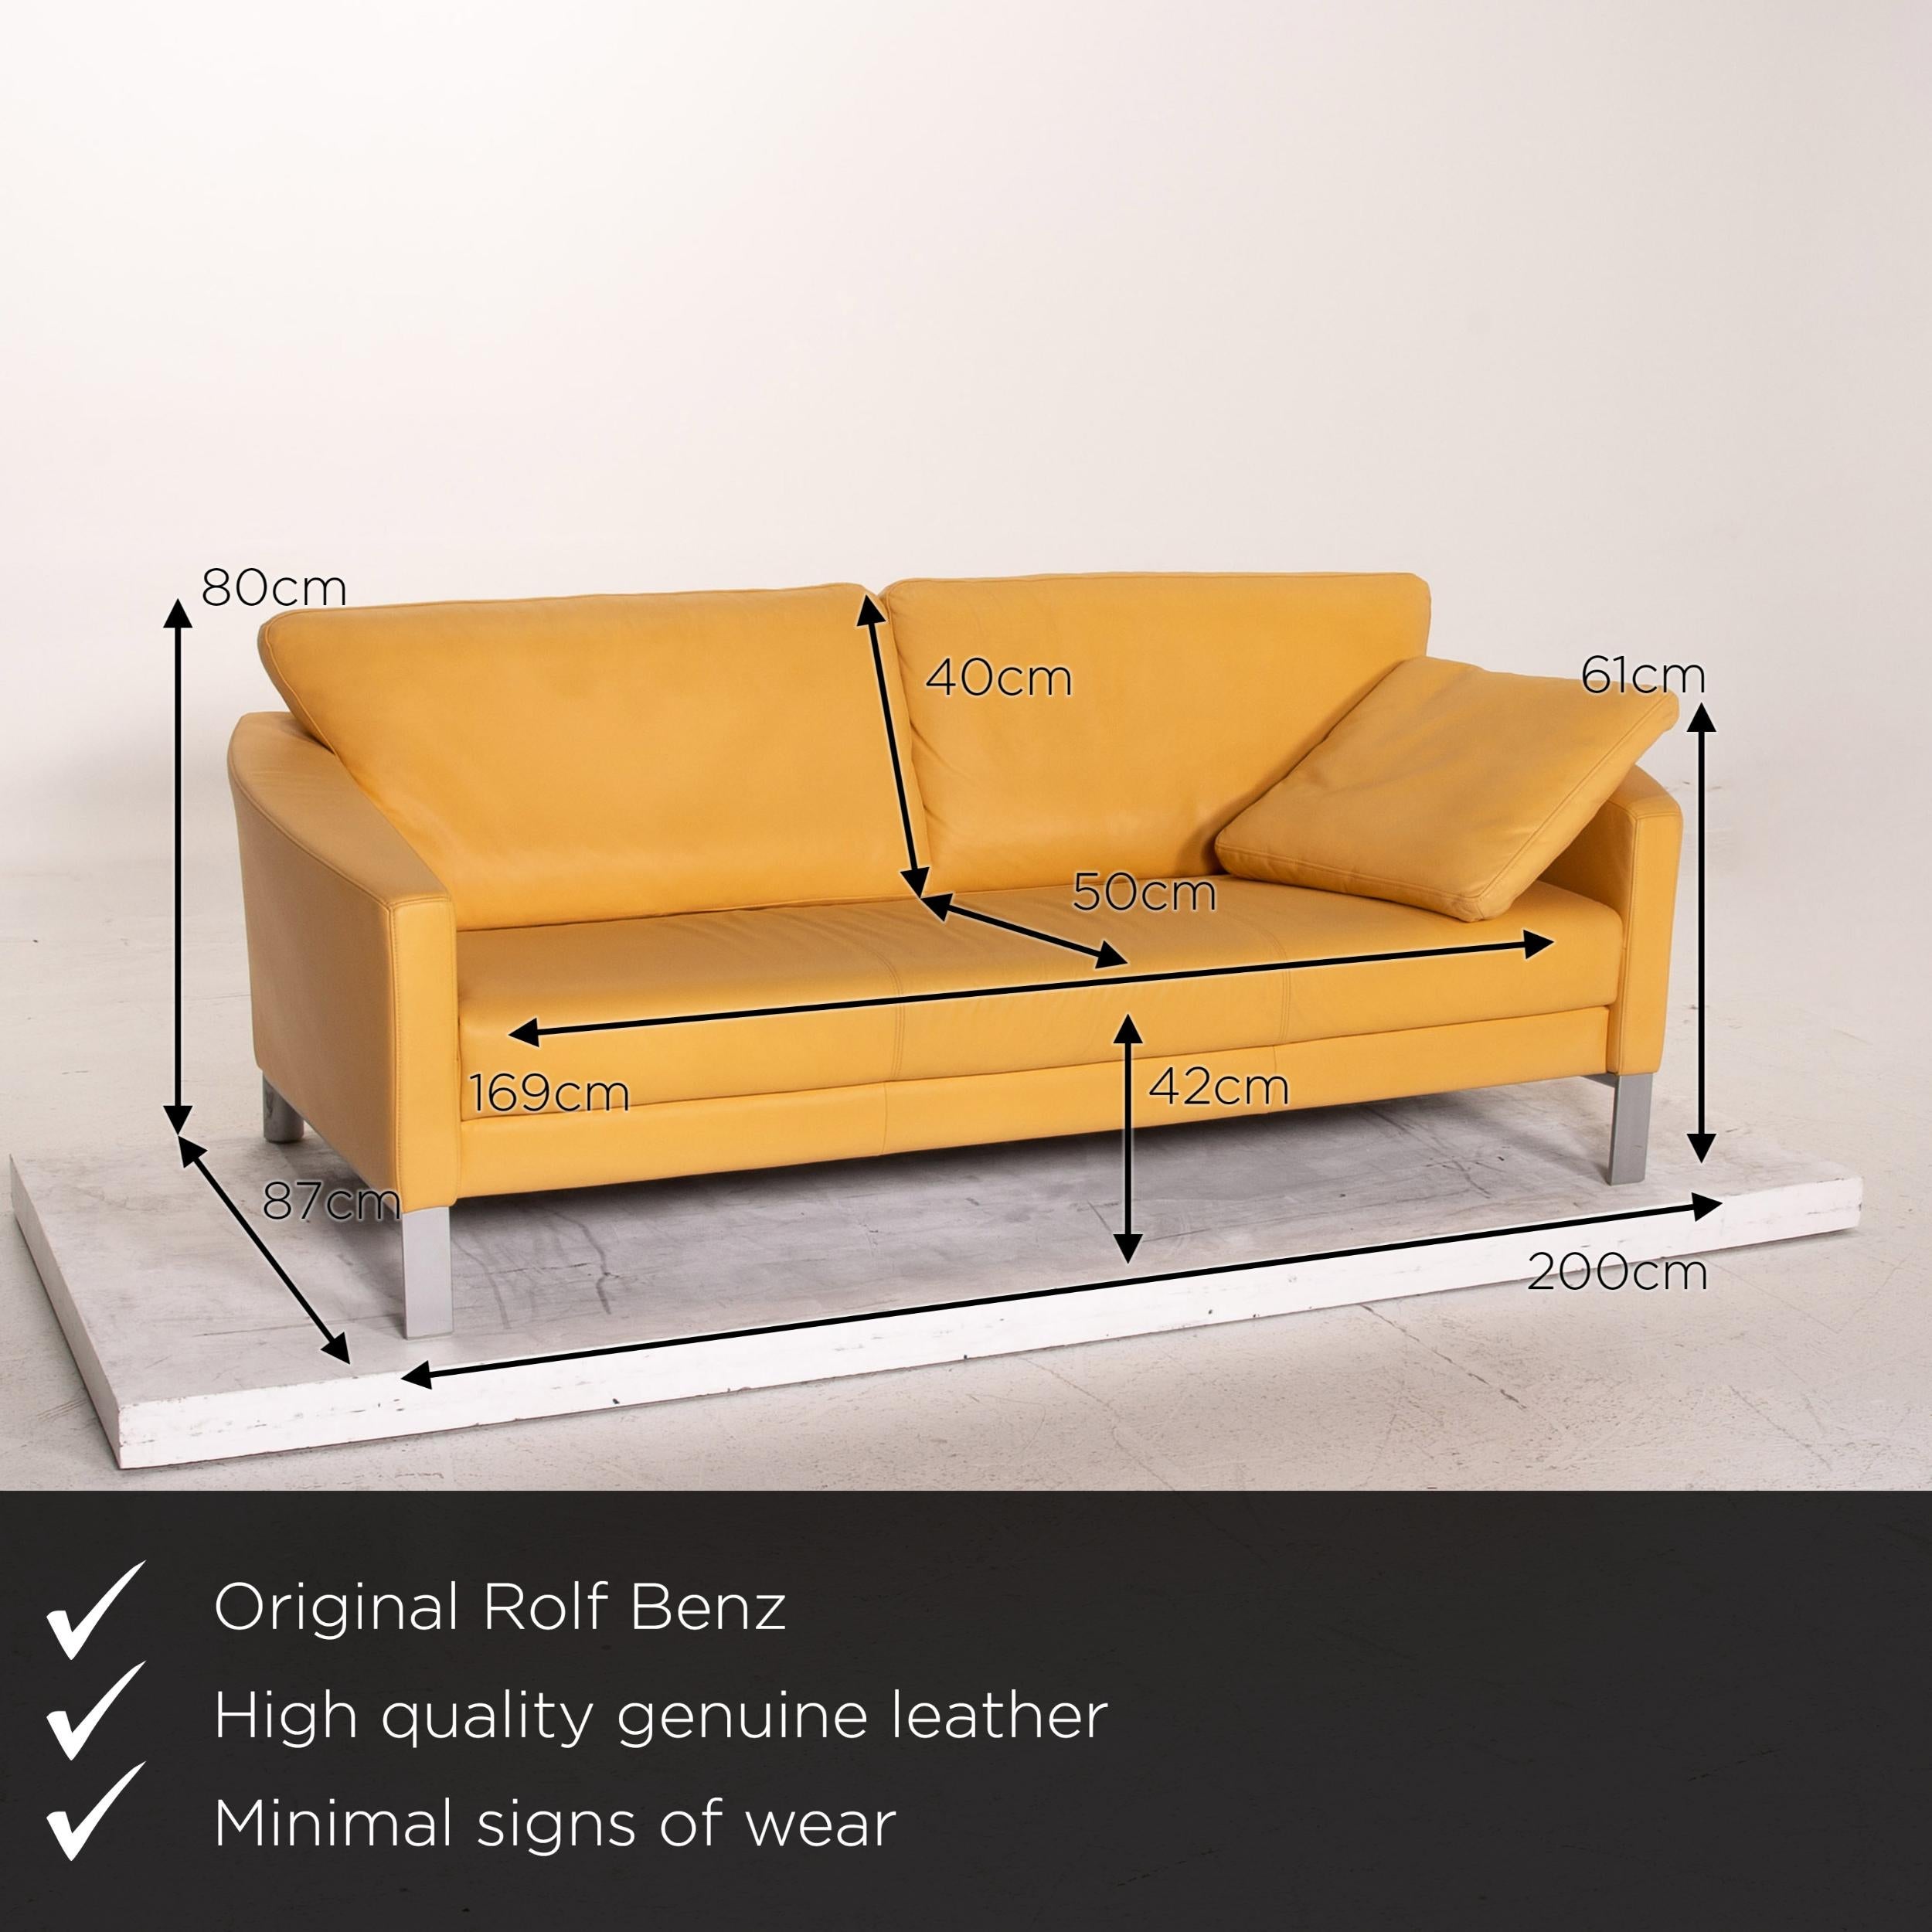 We present to you a Rolf Benz leather sofa yellow three-seat couch.

Product measurements in centimeters:

Depth 87
Width 200
Height 80
Seat height 42
Rest height 61
Seat depth 50
Seat width 169
Back height 40.
 
 
  